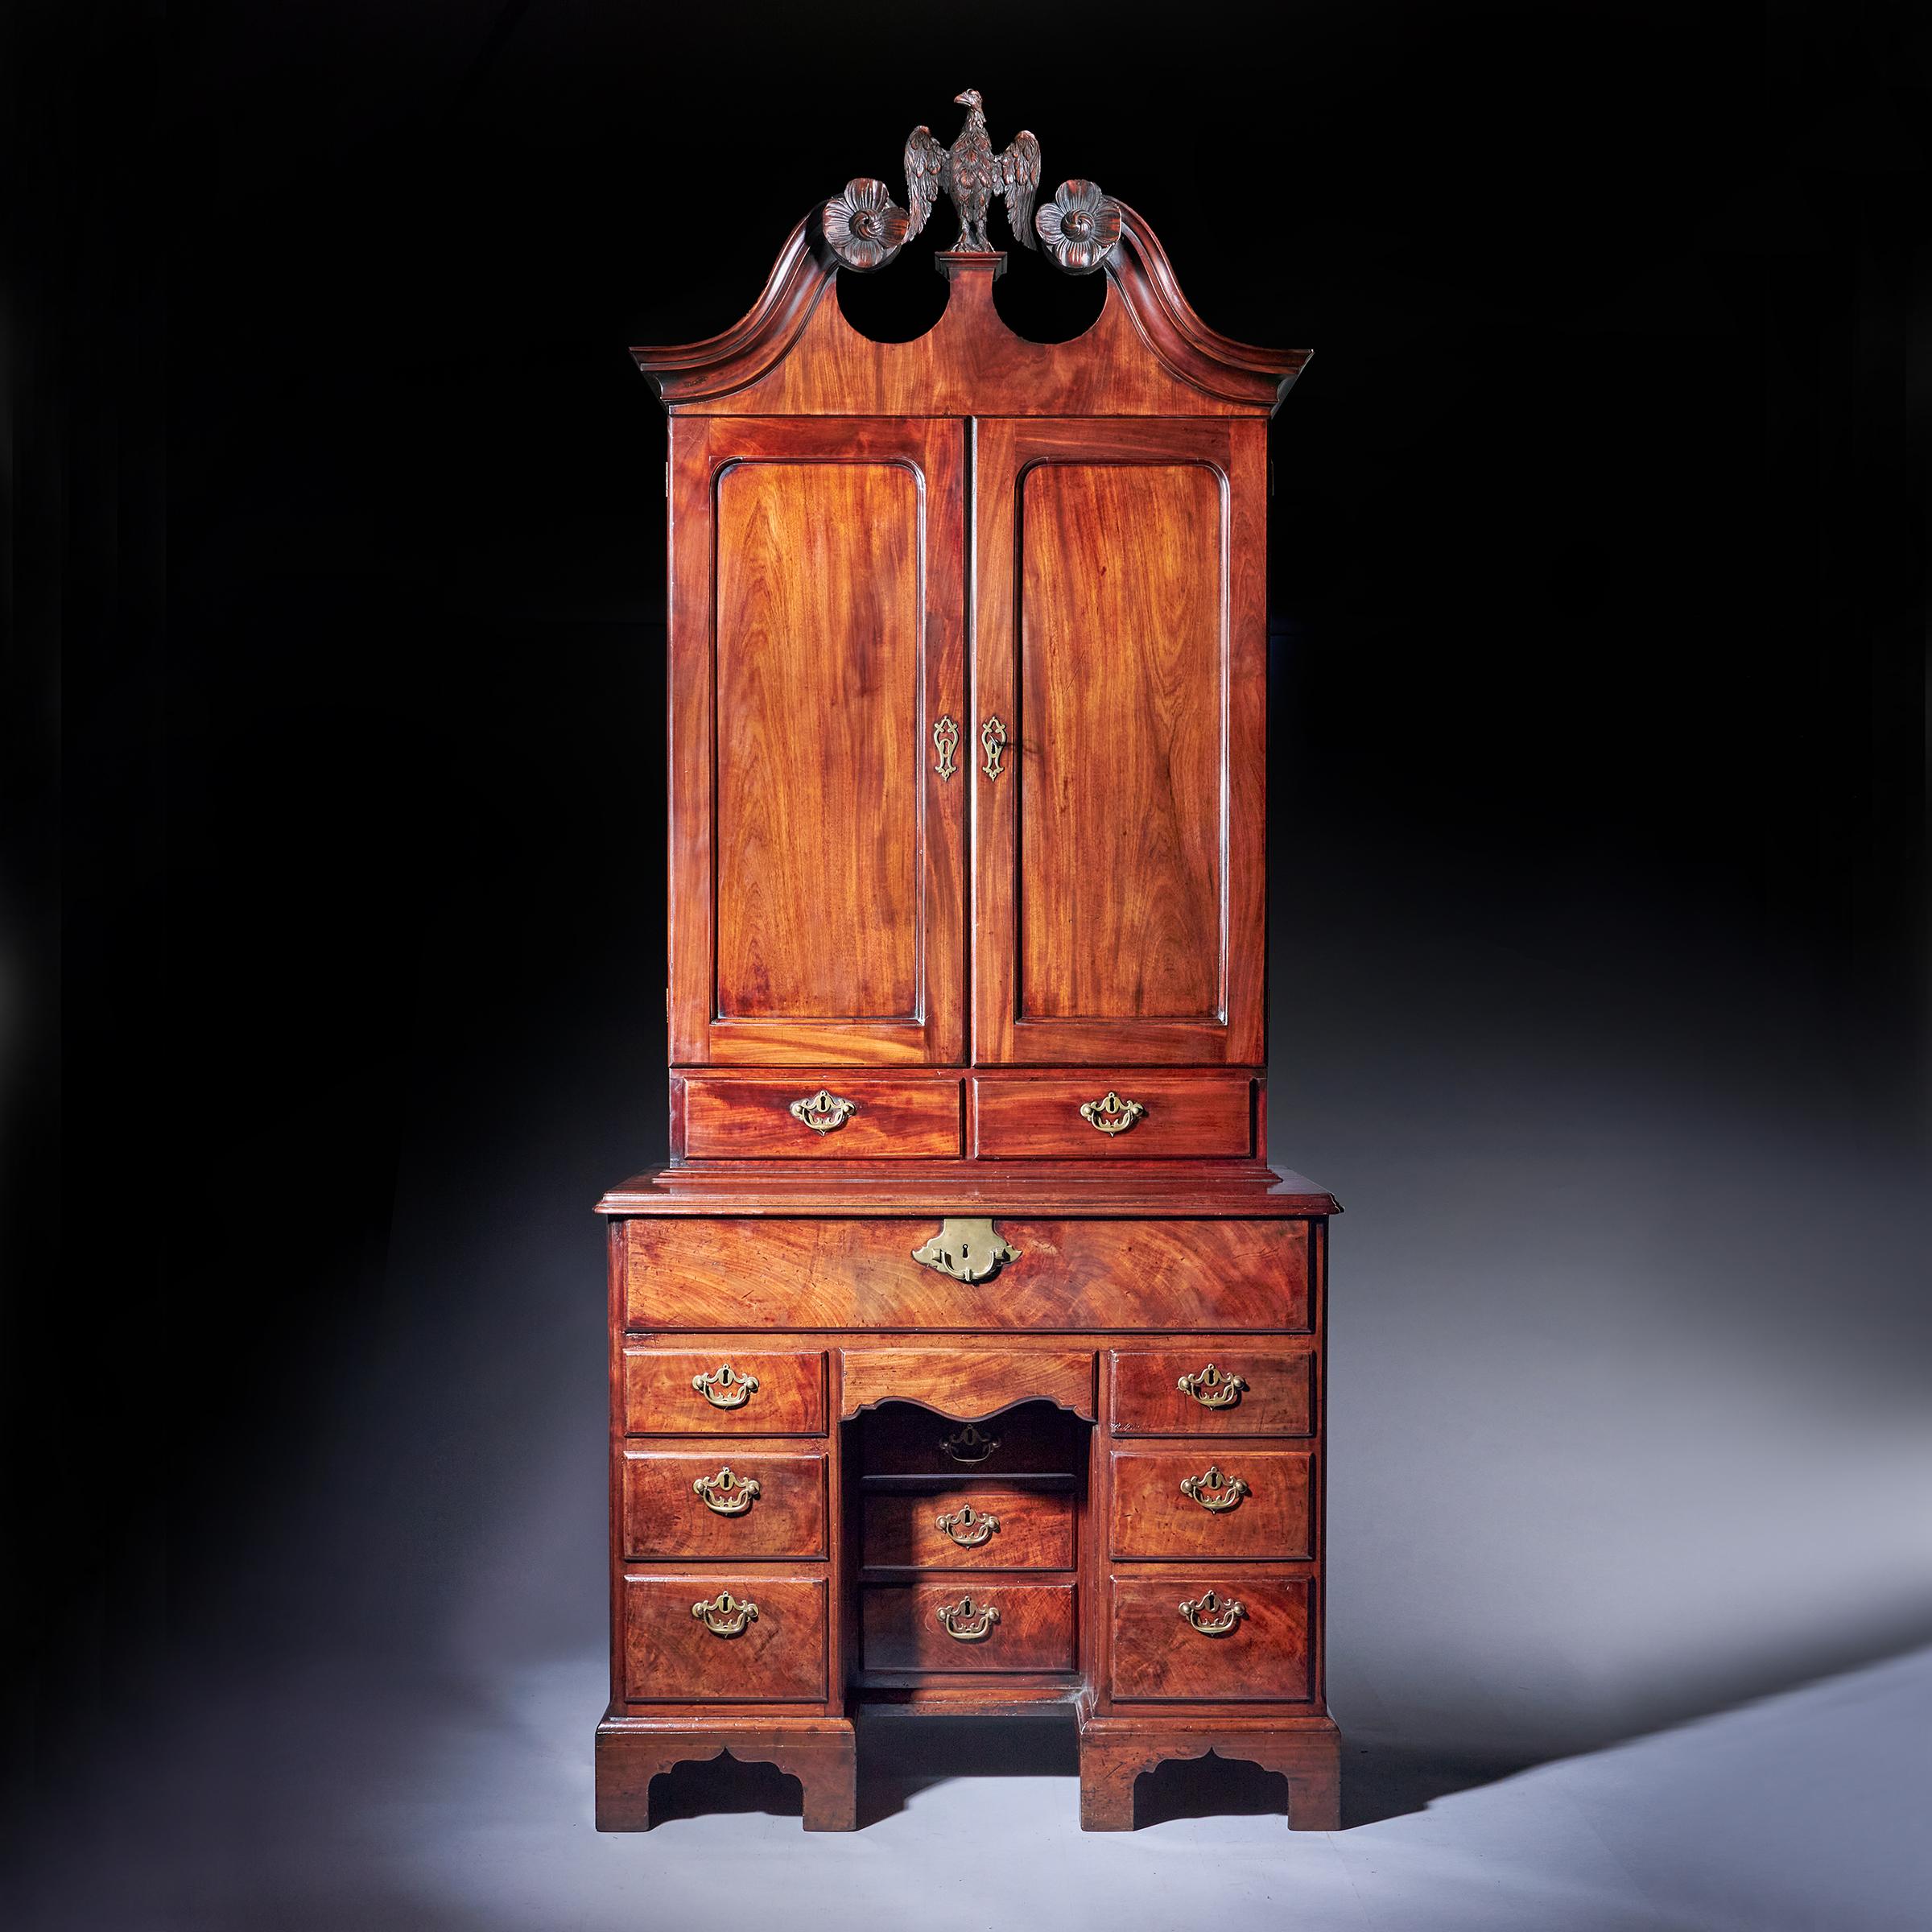 An original and rare two-part George II 18th century Irish architects figured mahogany secretaire bookcase, circa 1740, Ireland. 

Attributed to Christopher Hearn of Dublin.

An impressive carved eagle looking to the left is surmounted to the broken